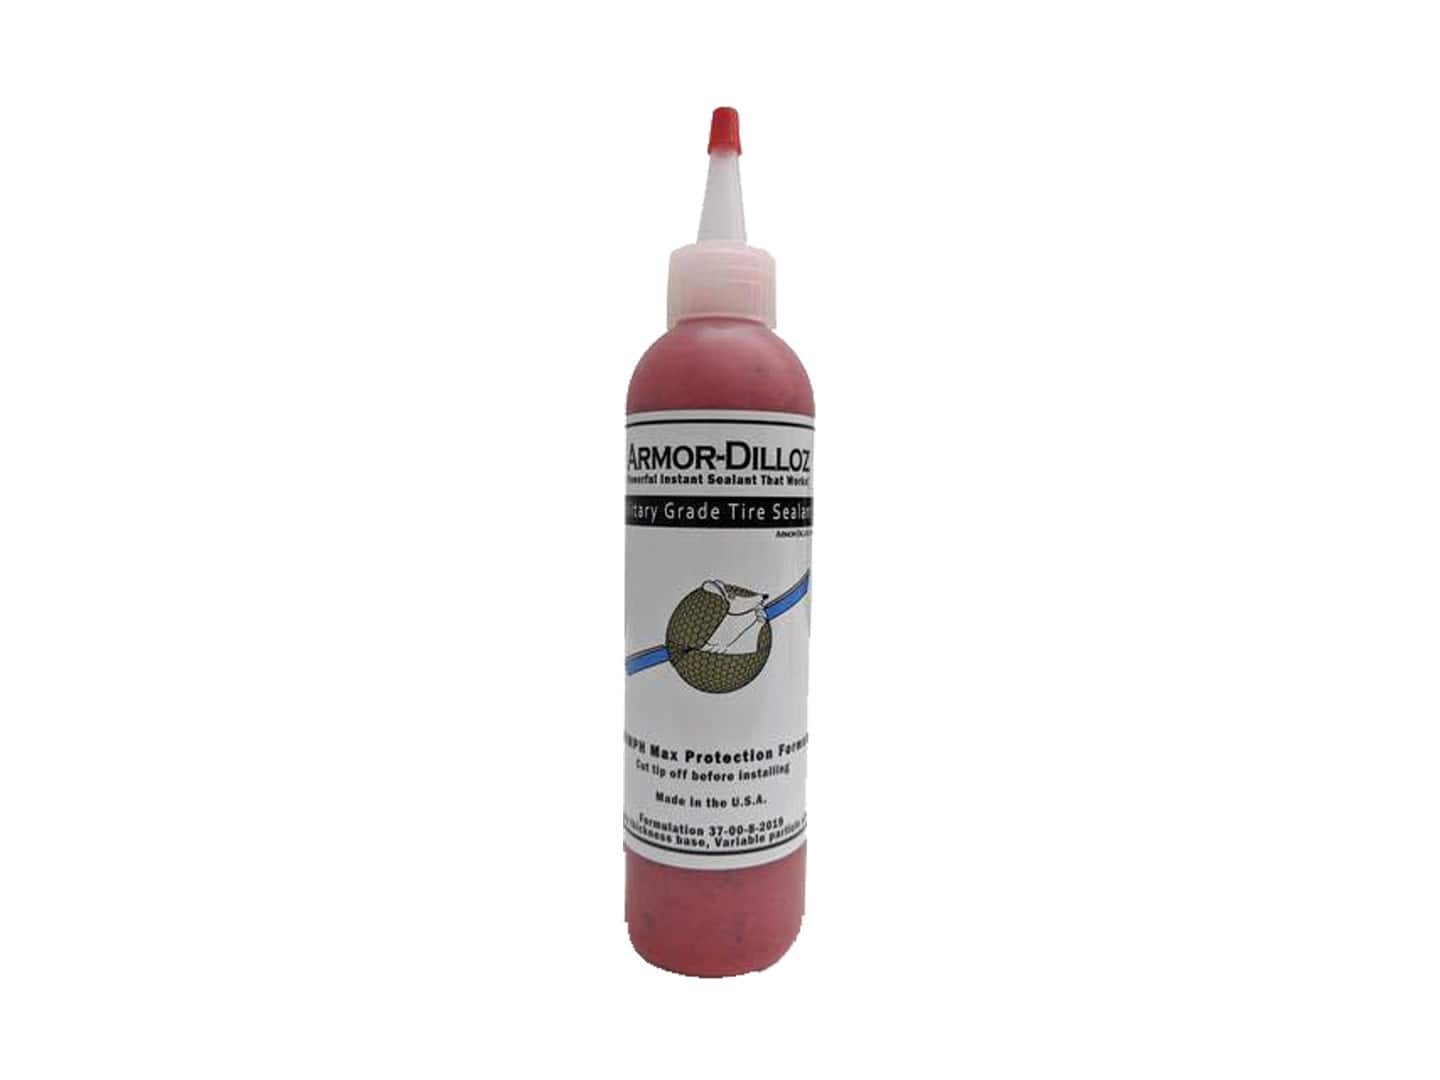 RED DILLO PUNCTURE-PROOF PRUDUCT